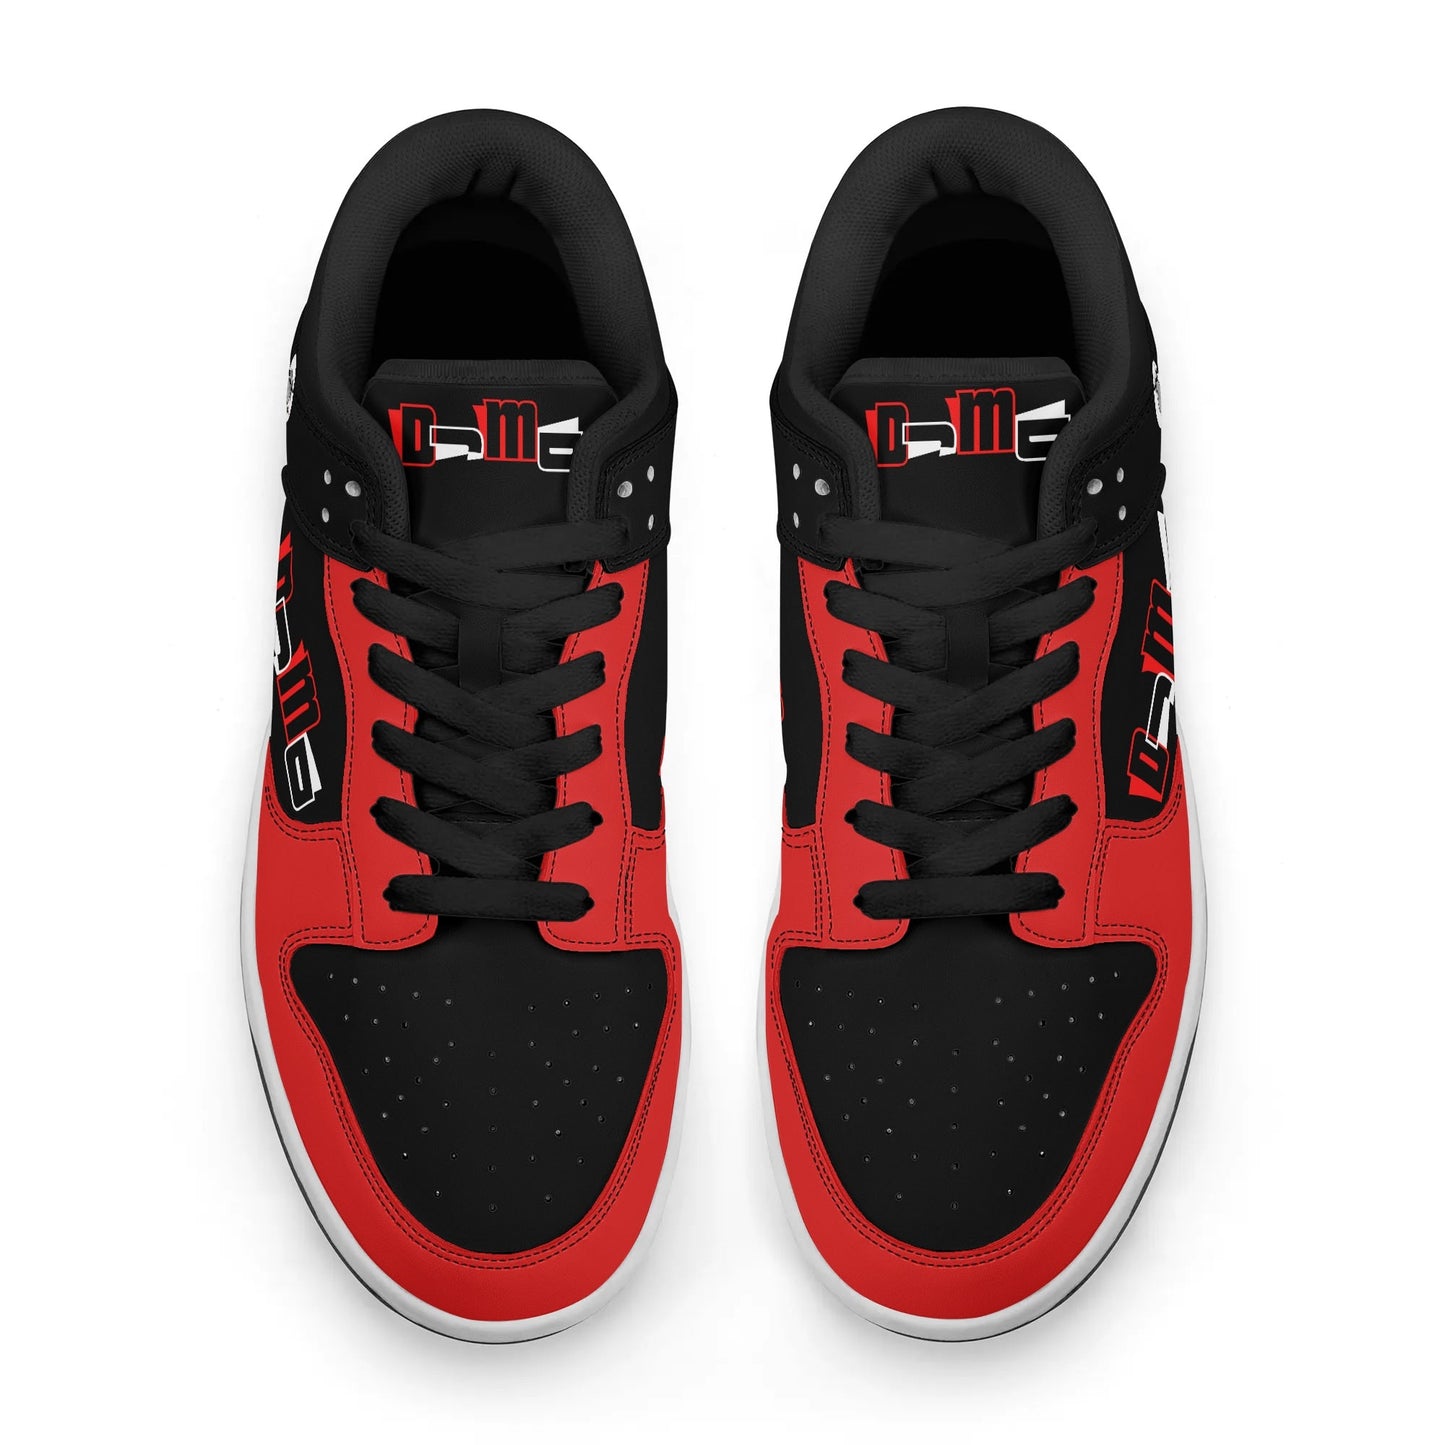 Dnt Juge My Different Mens Stylish Low Top Leather Sneakers